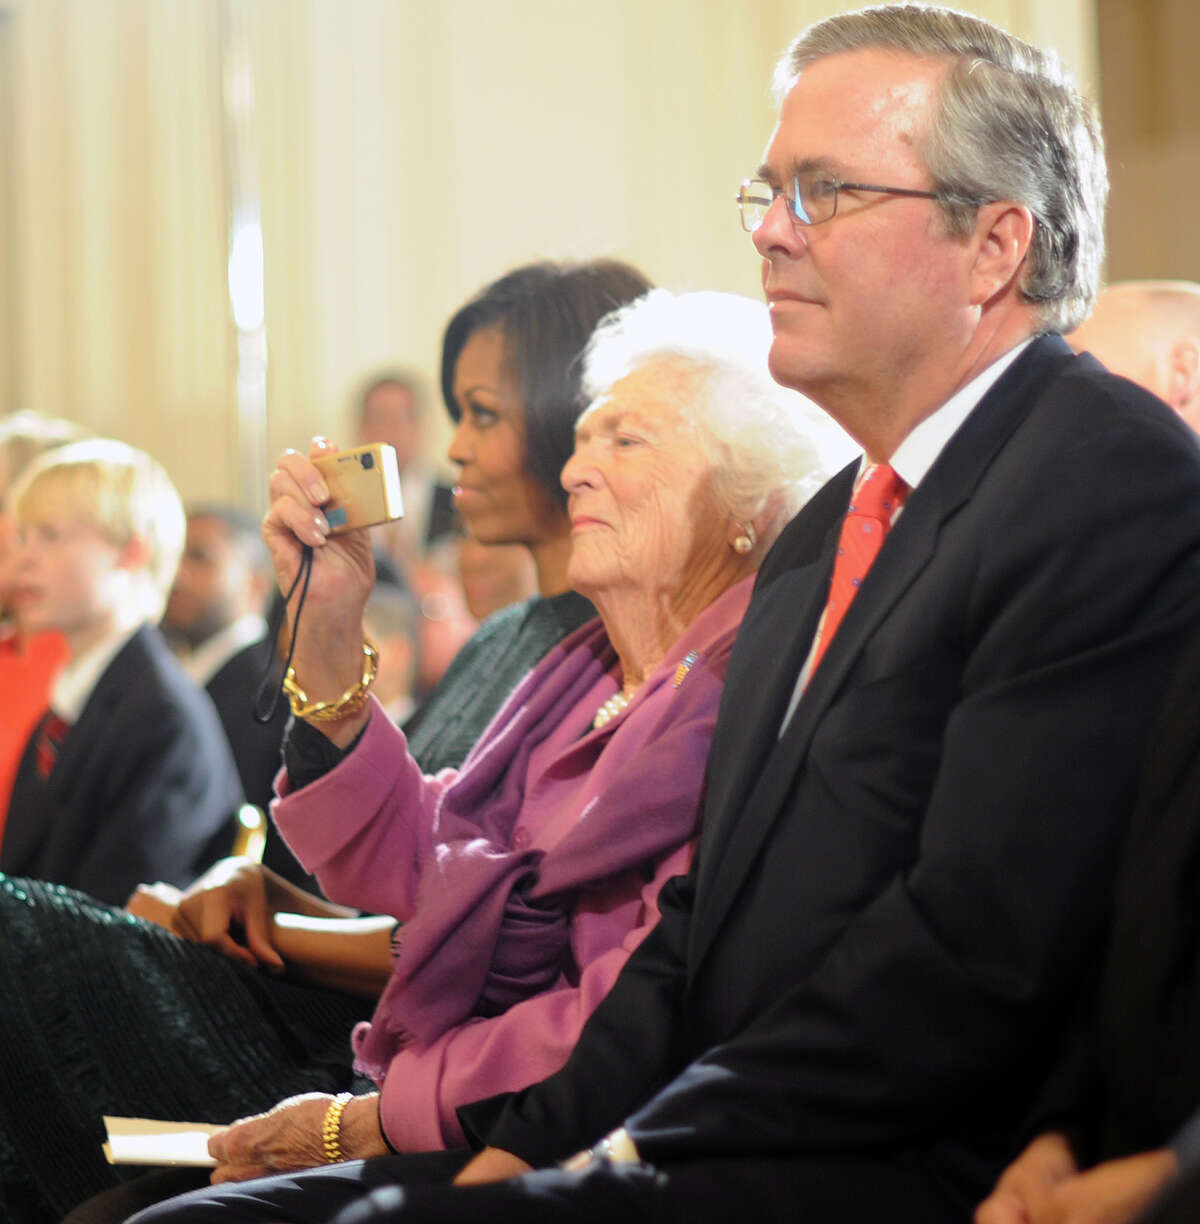 “We’ve had enough Bushes,” Barbara Bush shot back when asked in 2013 about son Jeb Bush running in 2016.